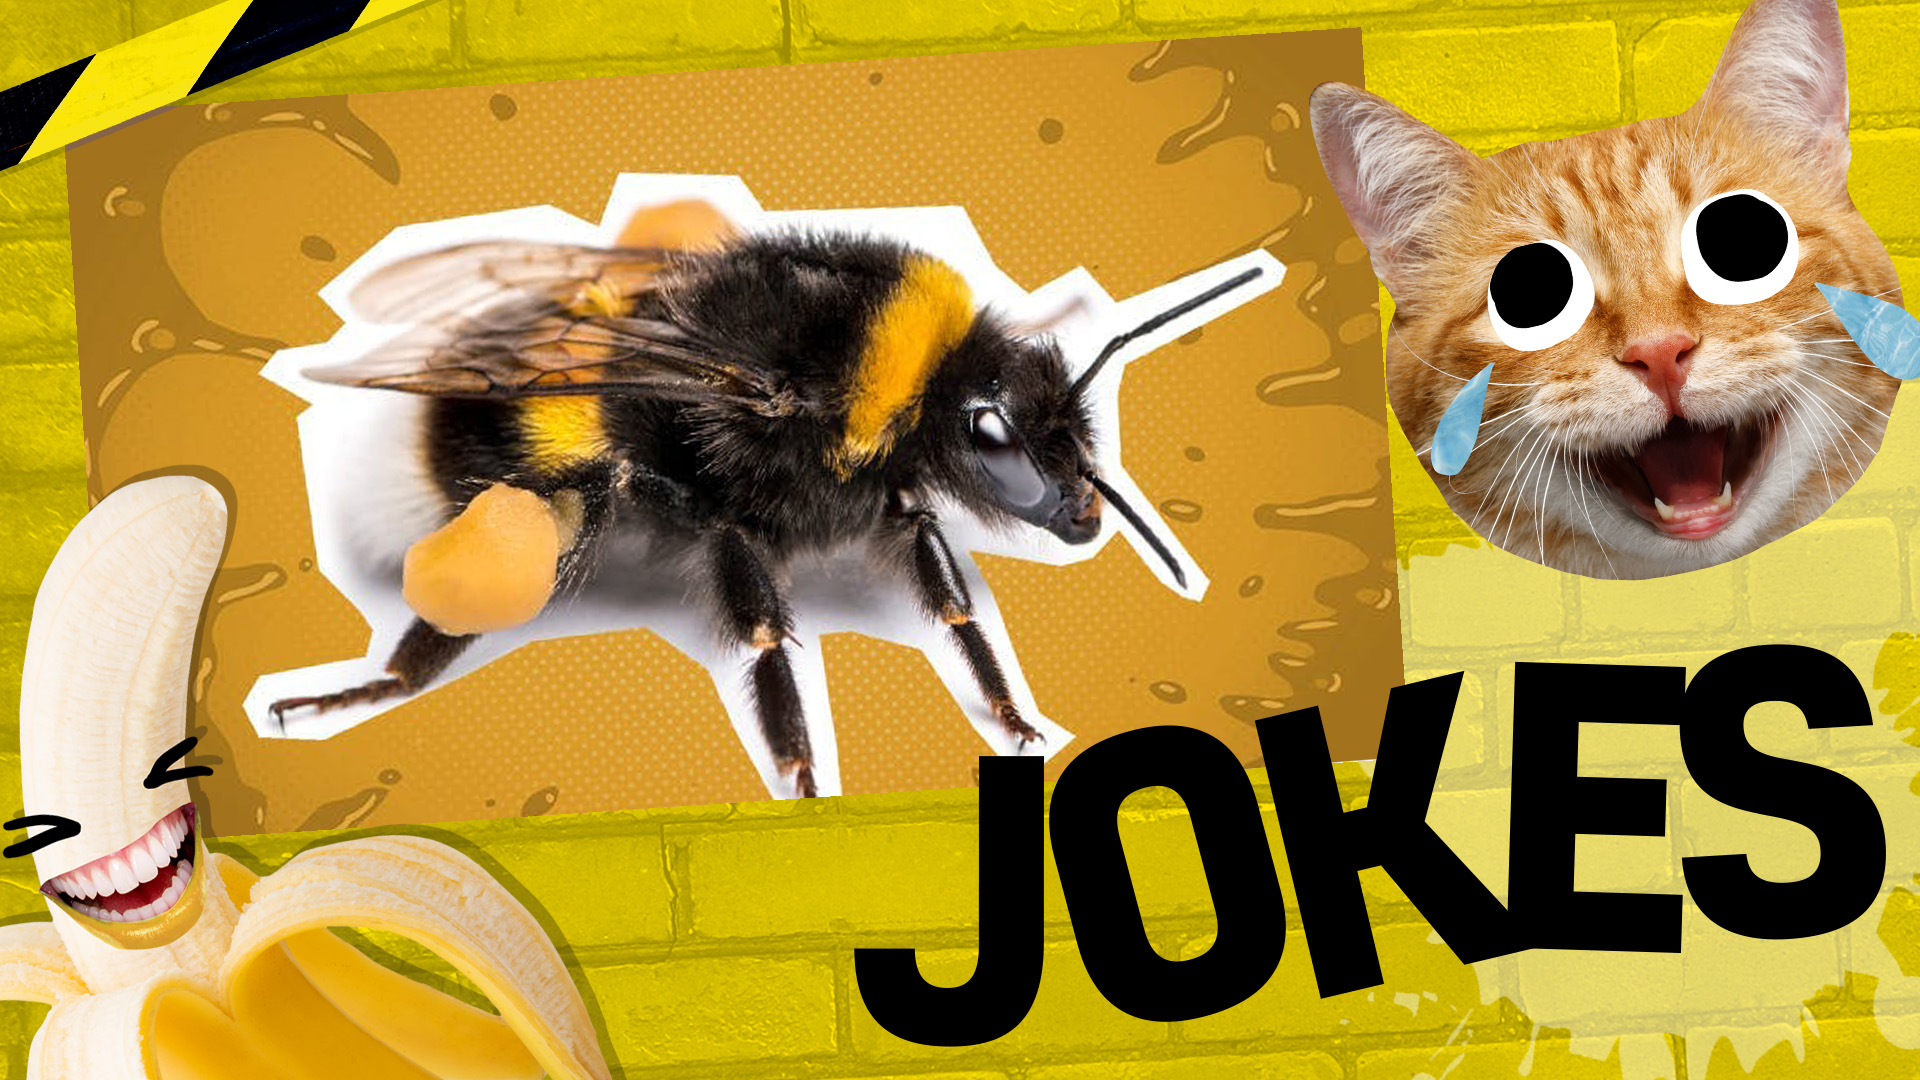 Funny bee jokes: a bee on a yellow background